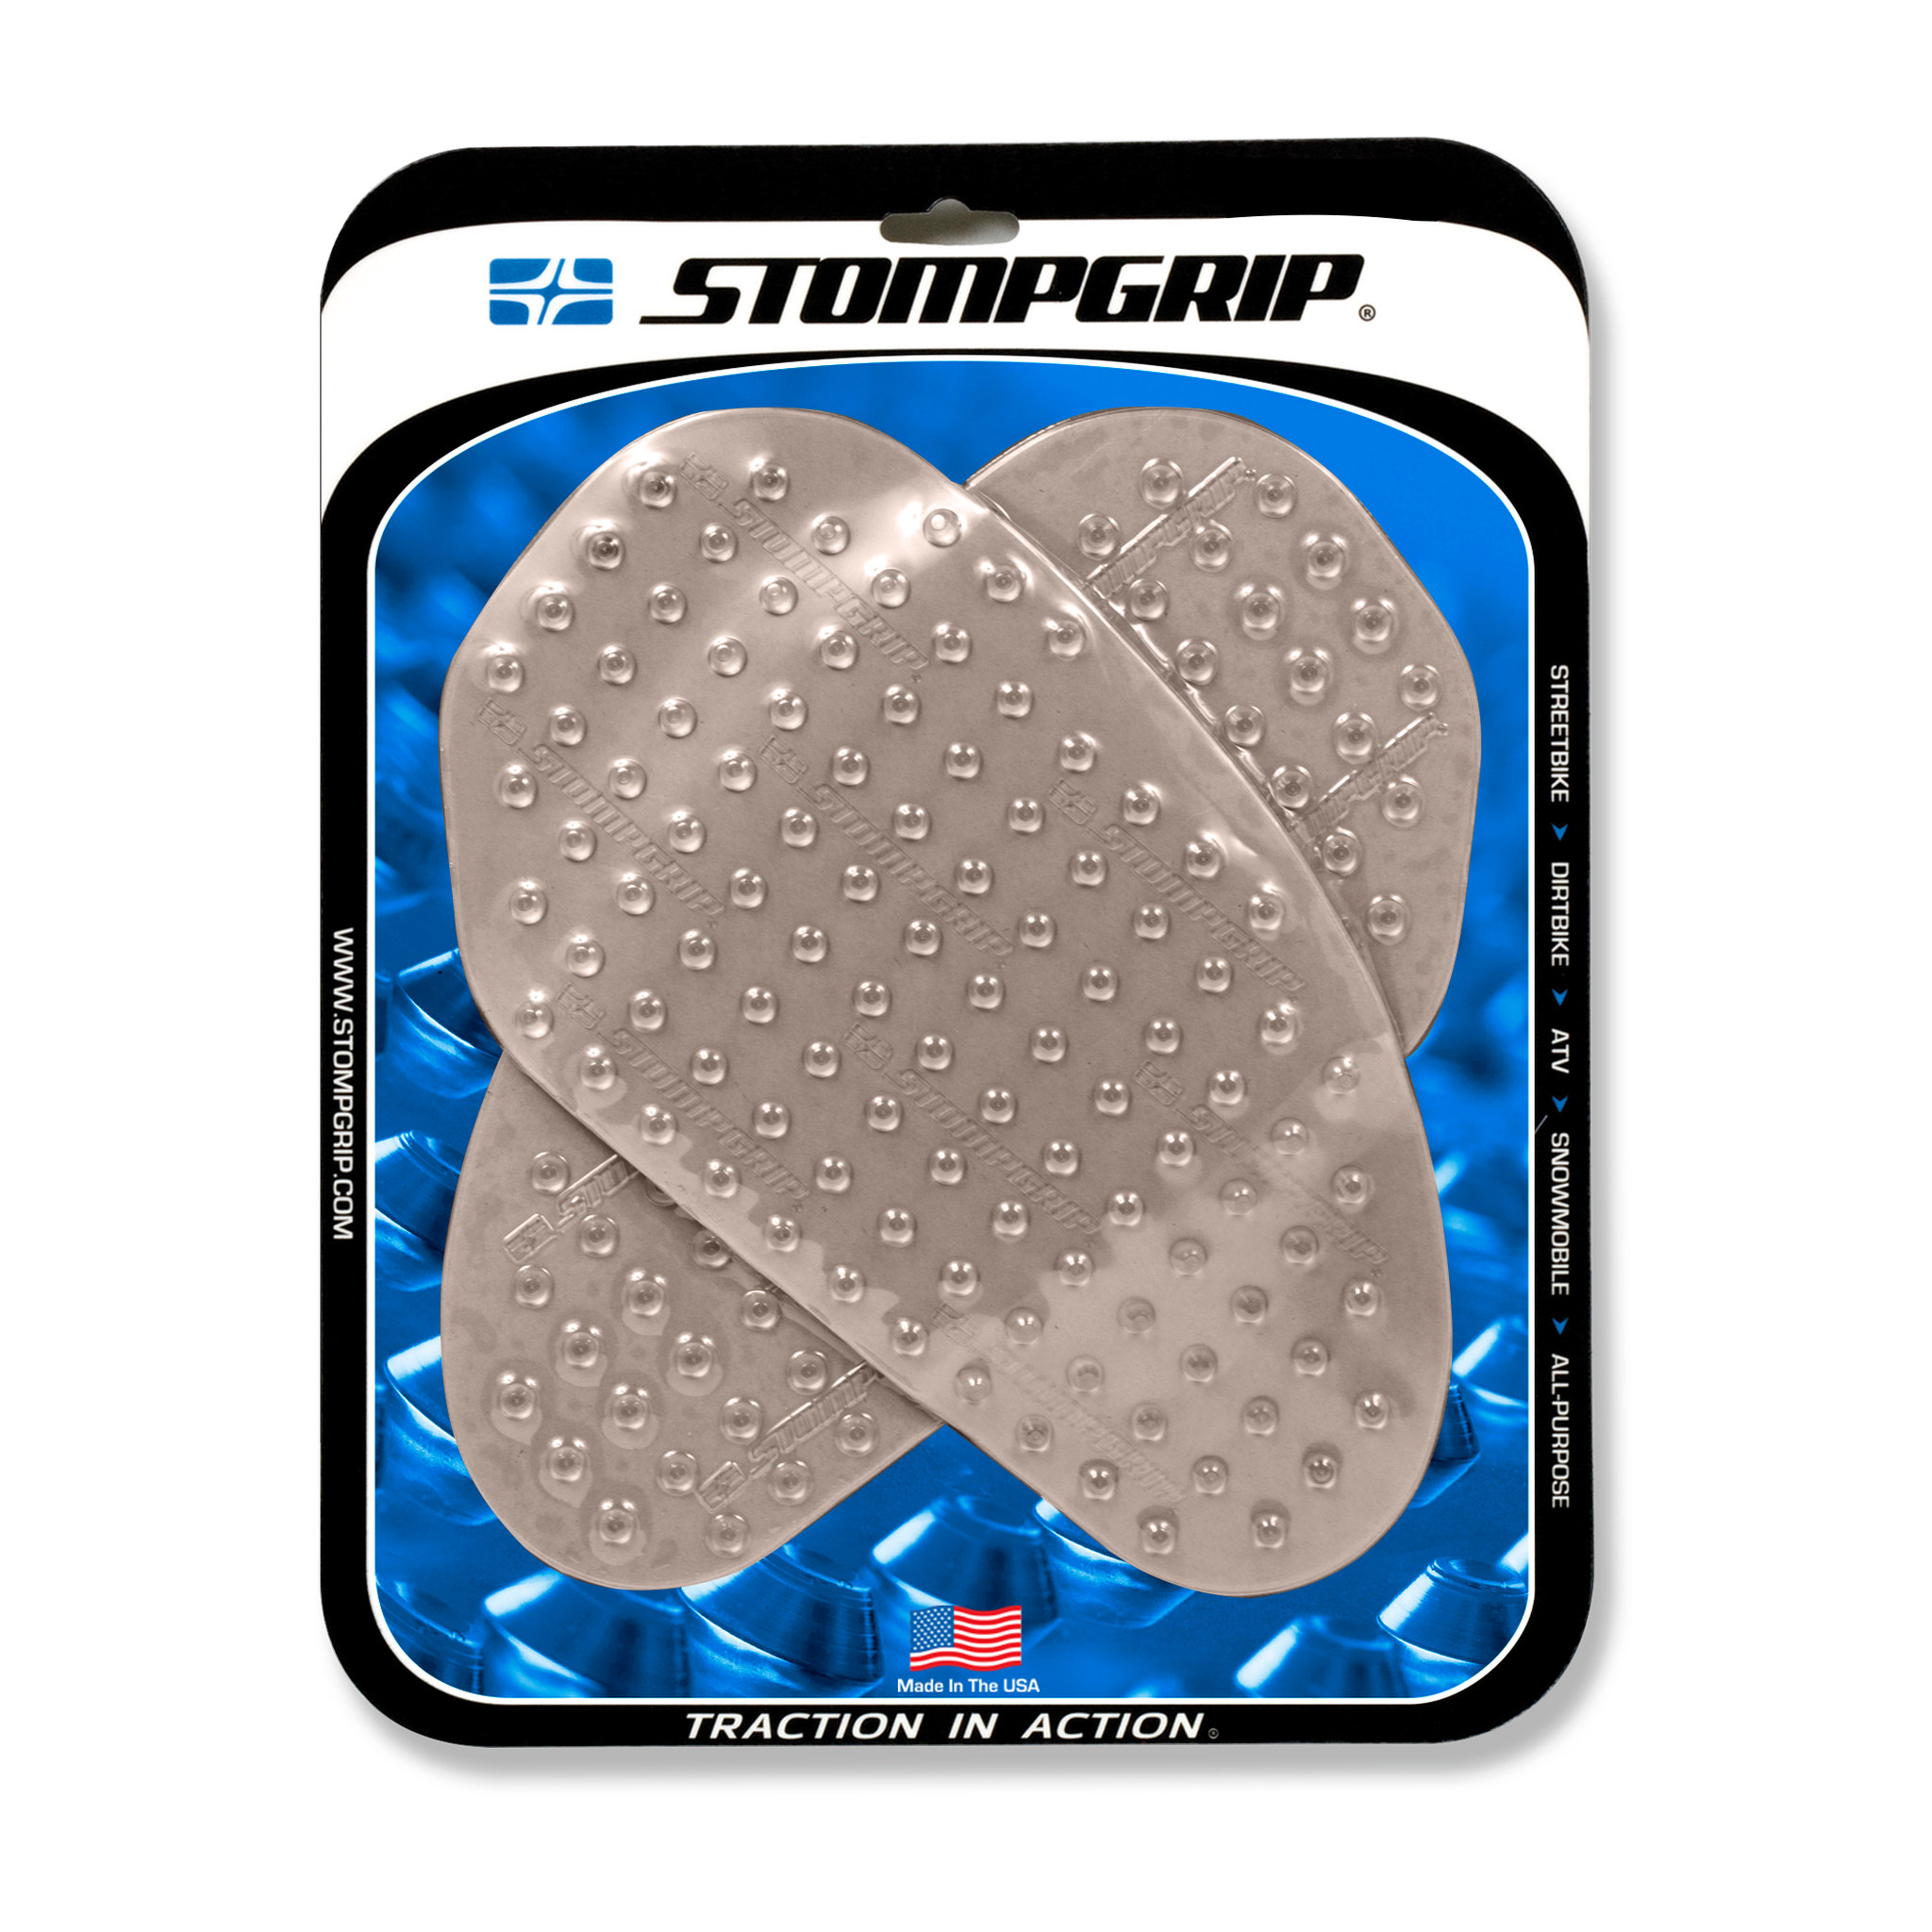 Jynx Stomp Pad : 3D Collection - Stompgrip